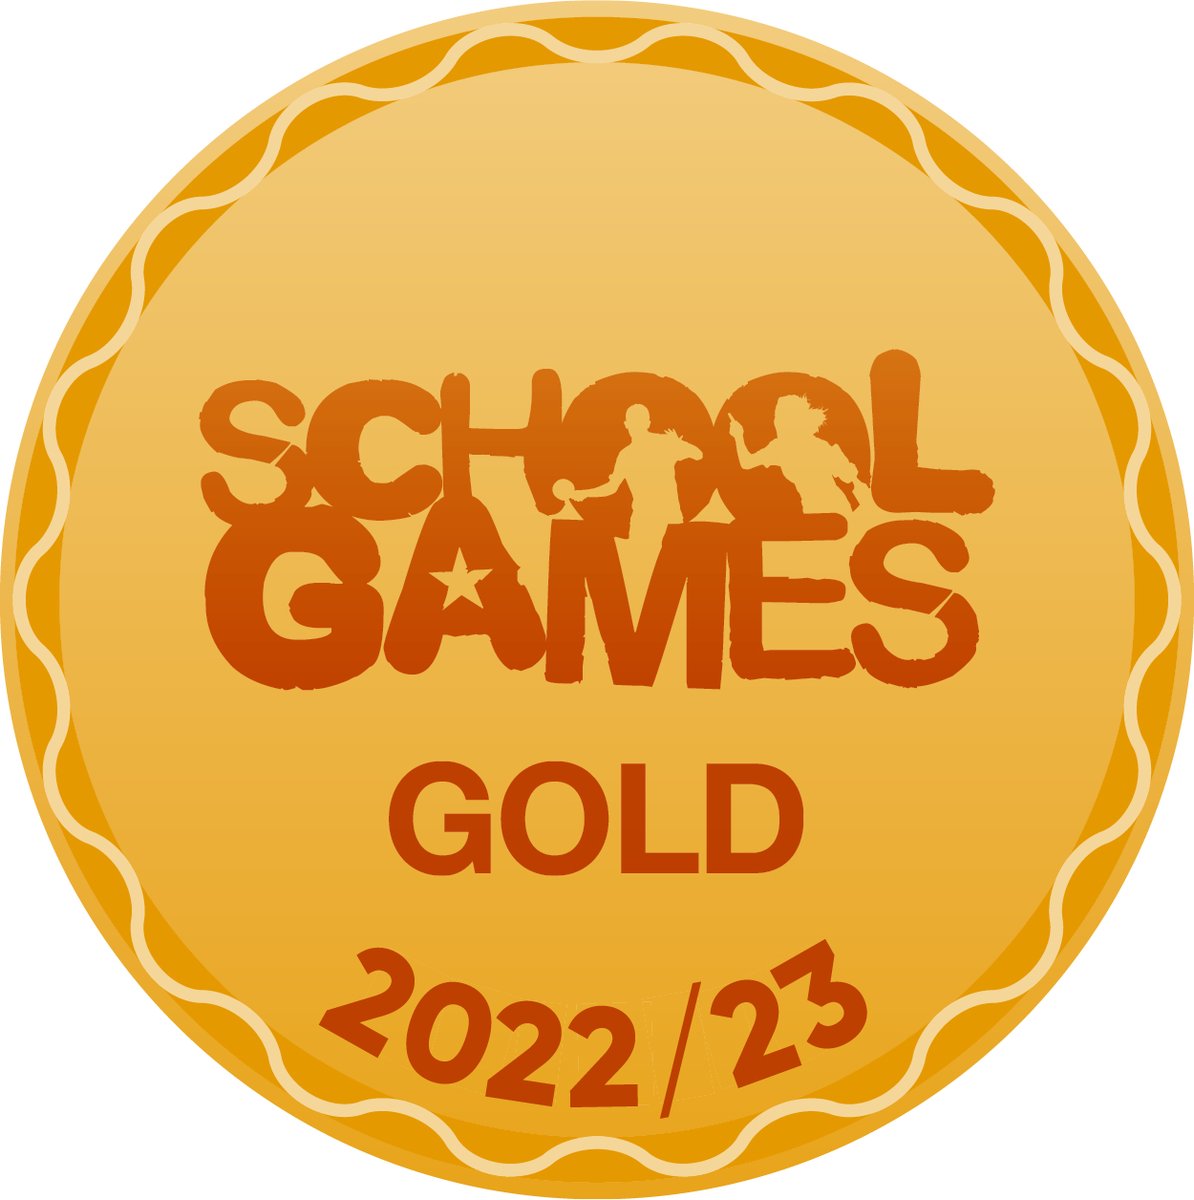 And it's GOLD for @ArdleyHill wondeful to see them push on further by demonstrating the importance of PE and Sport in their school. Very proud of you all! @YourSchoolGames